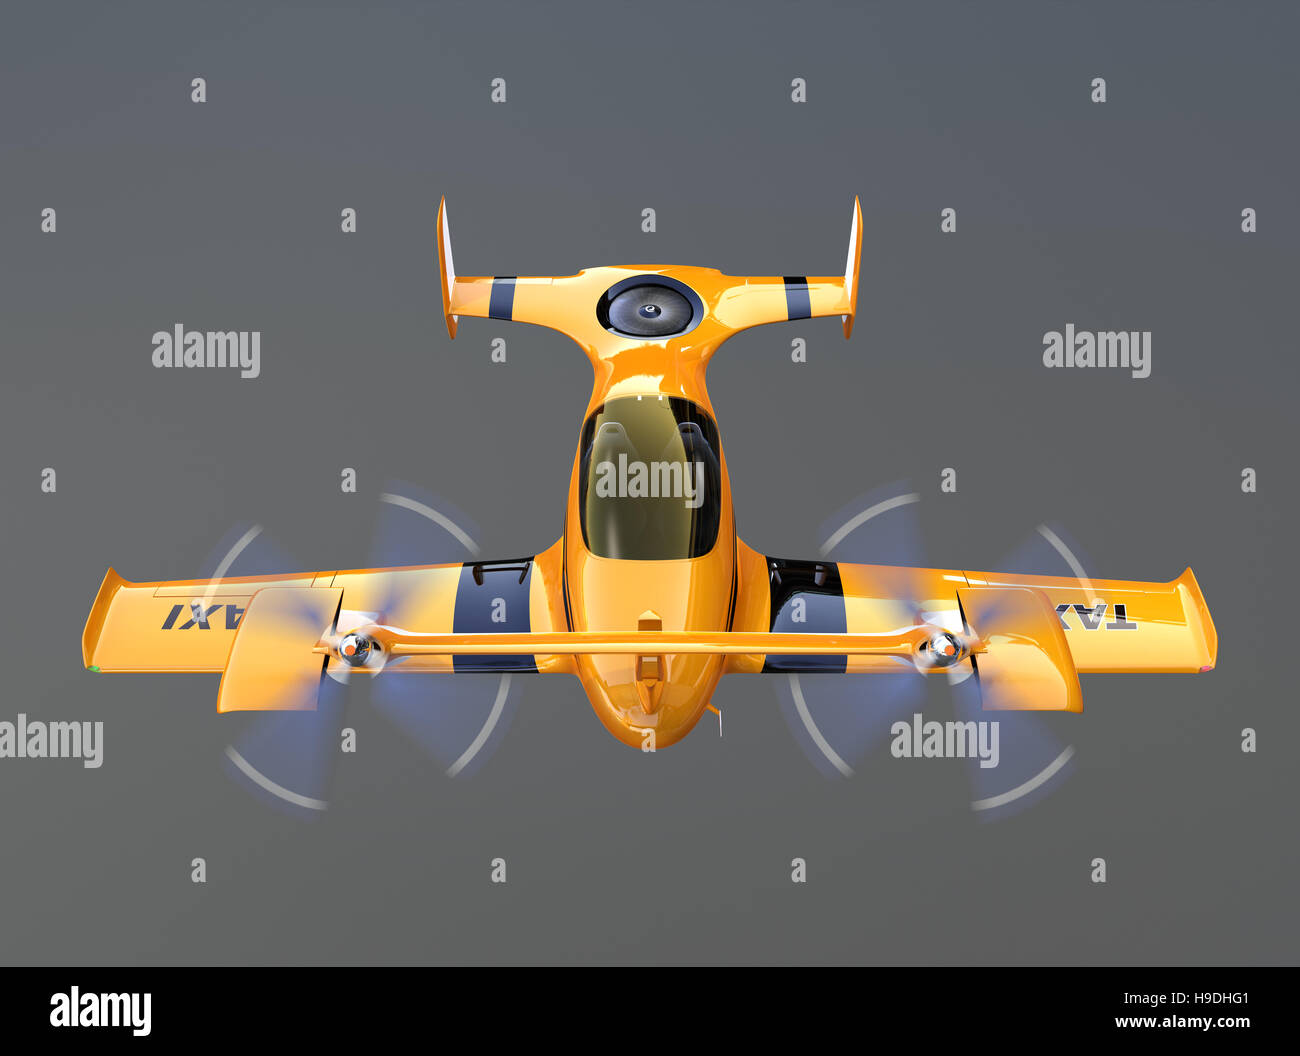 Front view of yellow autonomous flying drone taxi isolated on gray background. 3D rendering image. Stock Photo